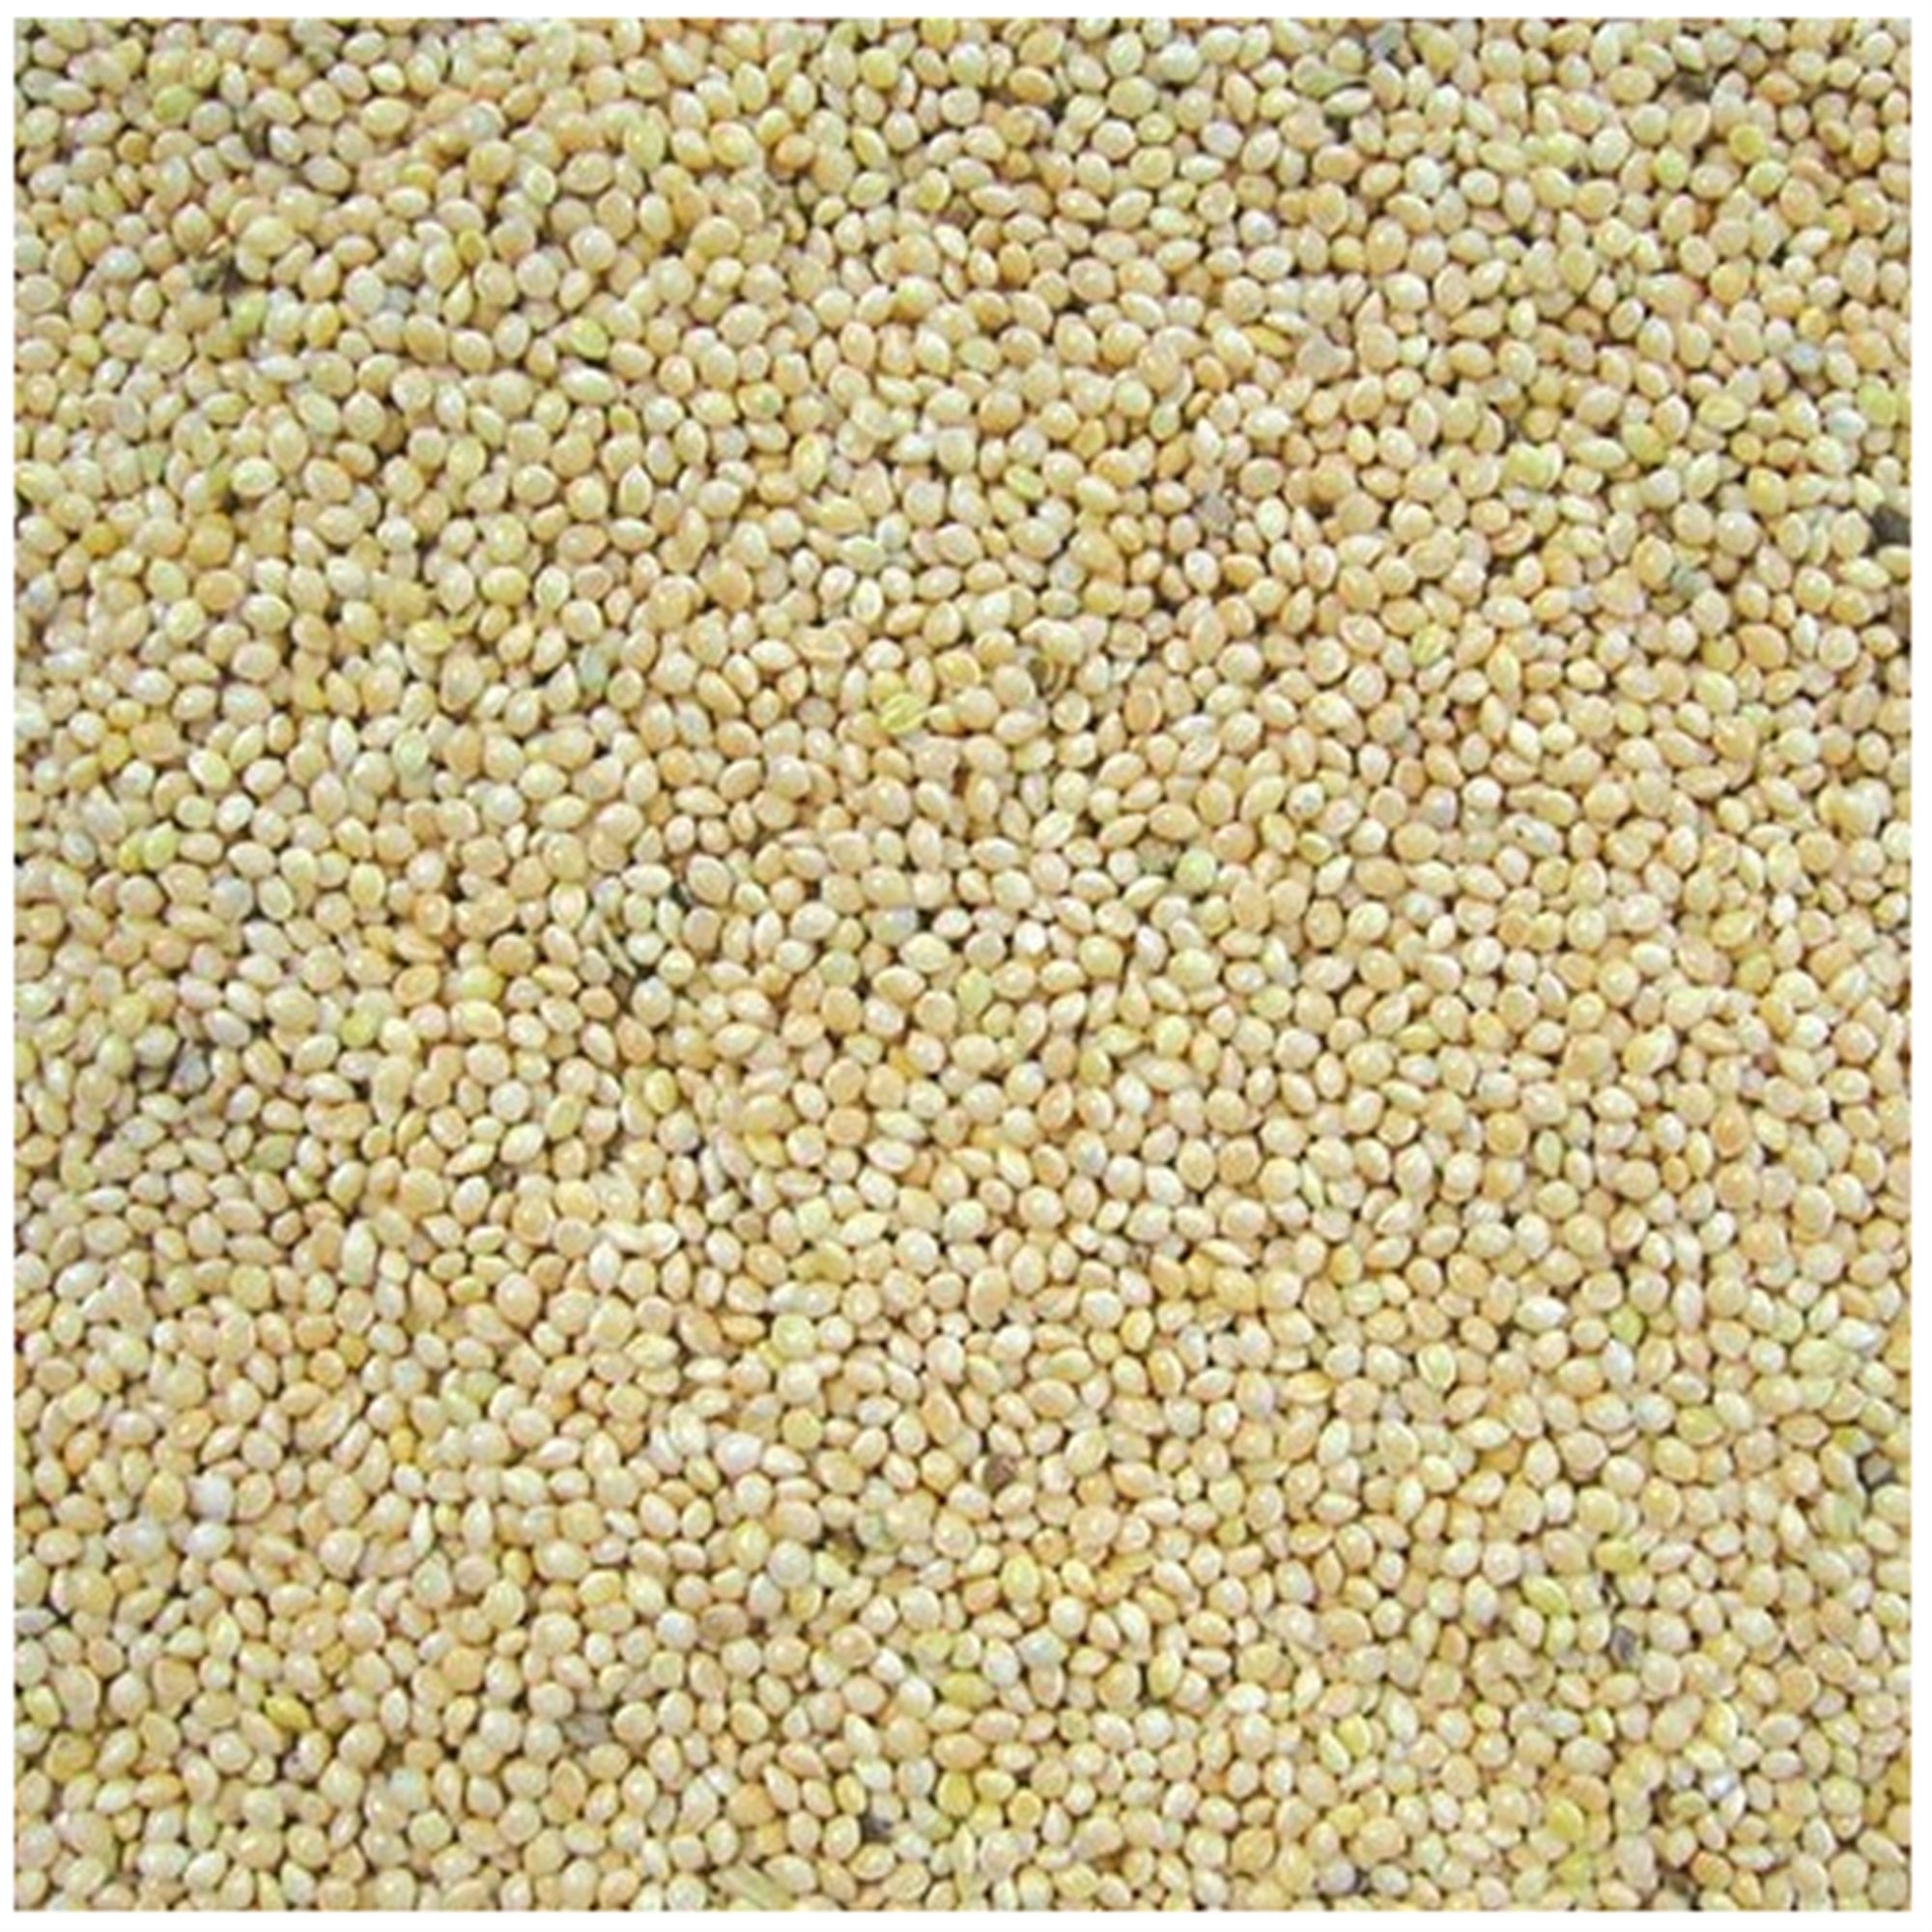 Cole's White Millet Outdoor Bird Seed